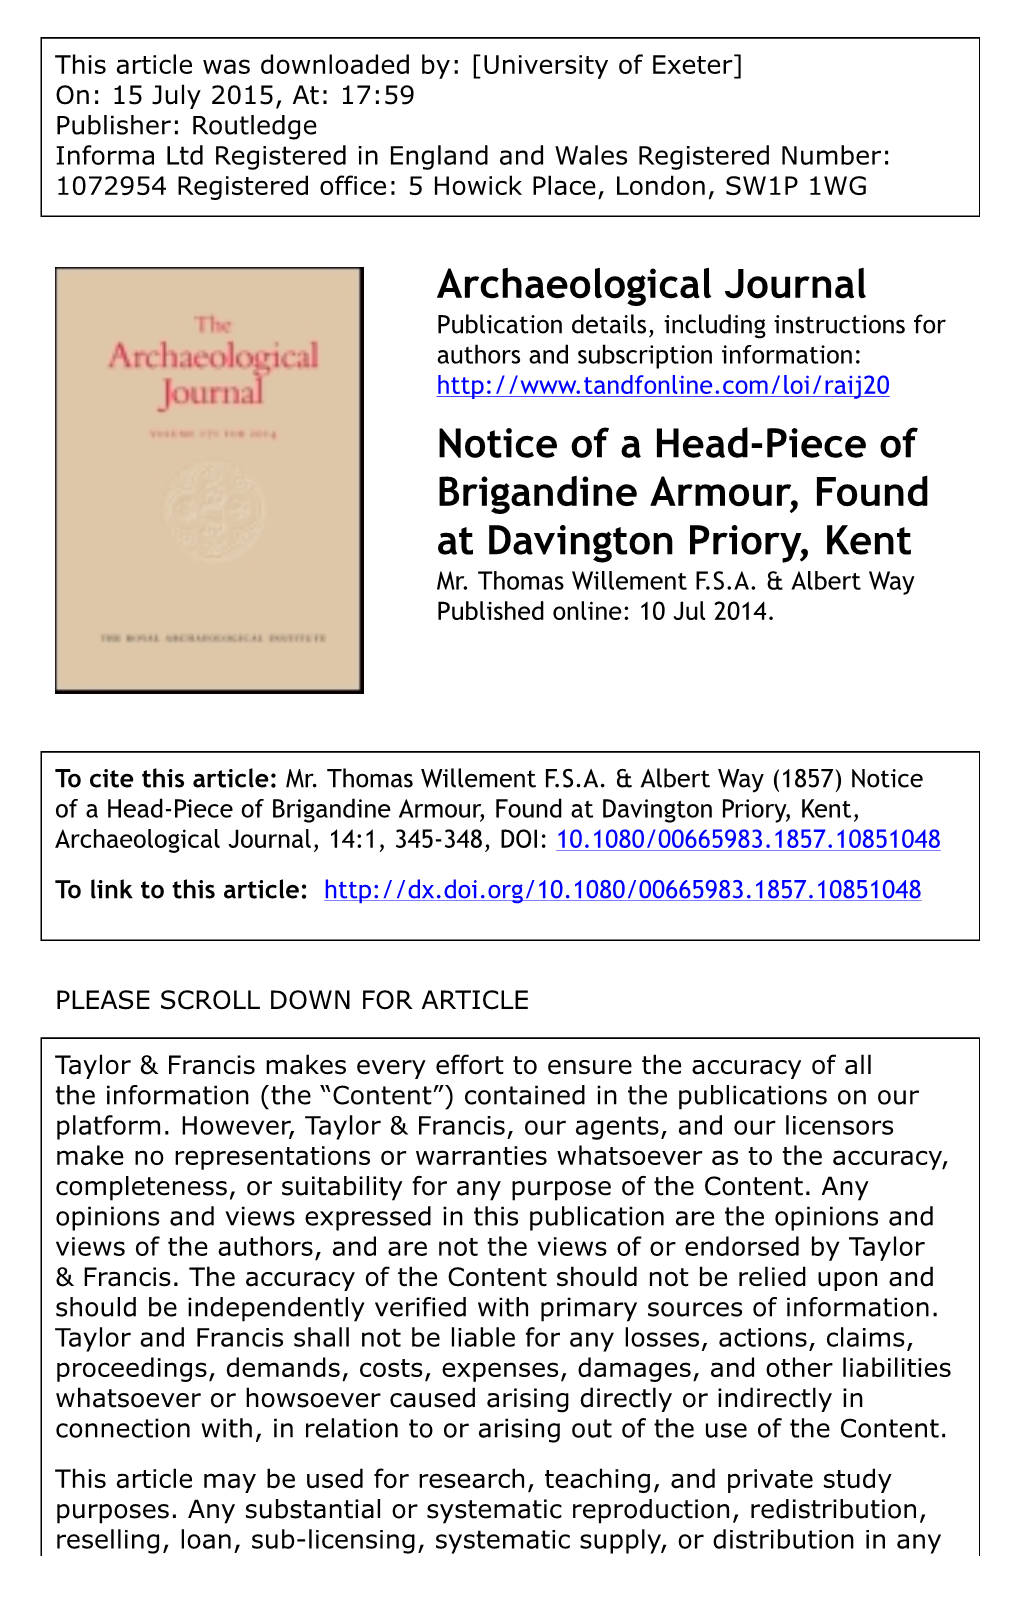 Archaeological Journal Notice of a Head-Piece of Brigandine Armour, Found at Davington Priory, Kent